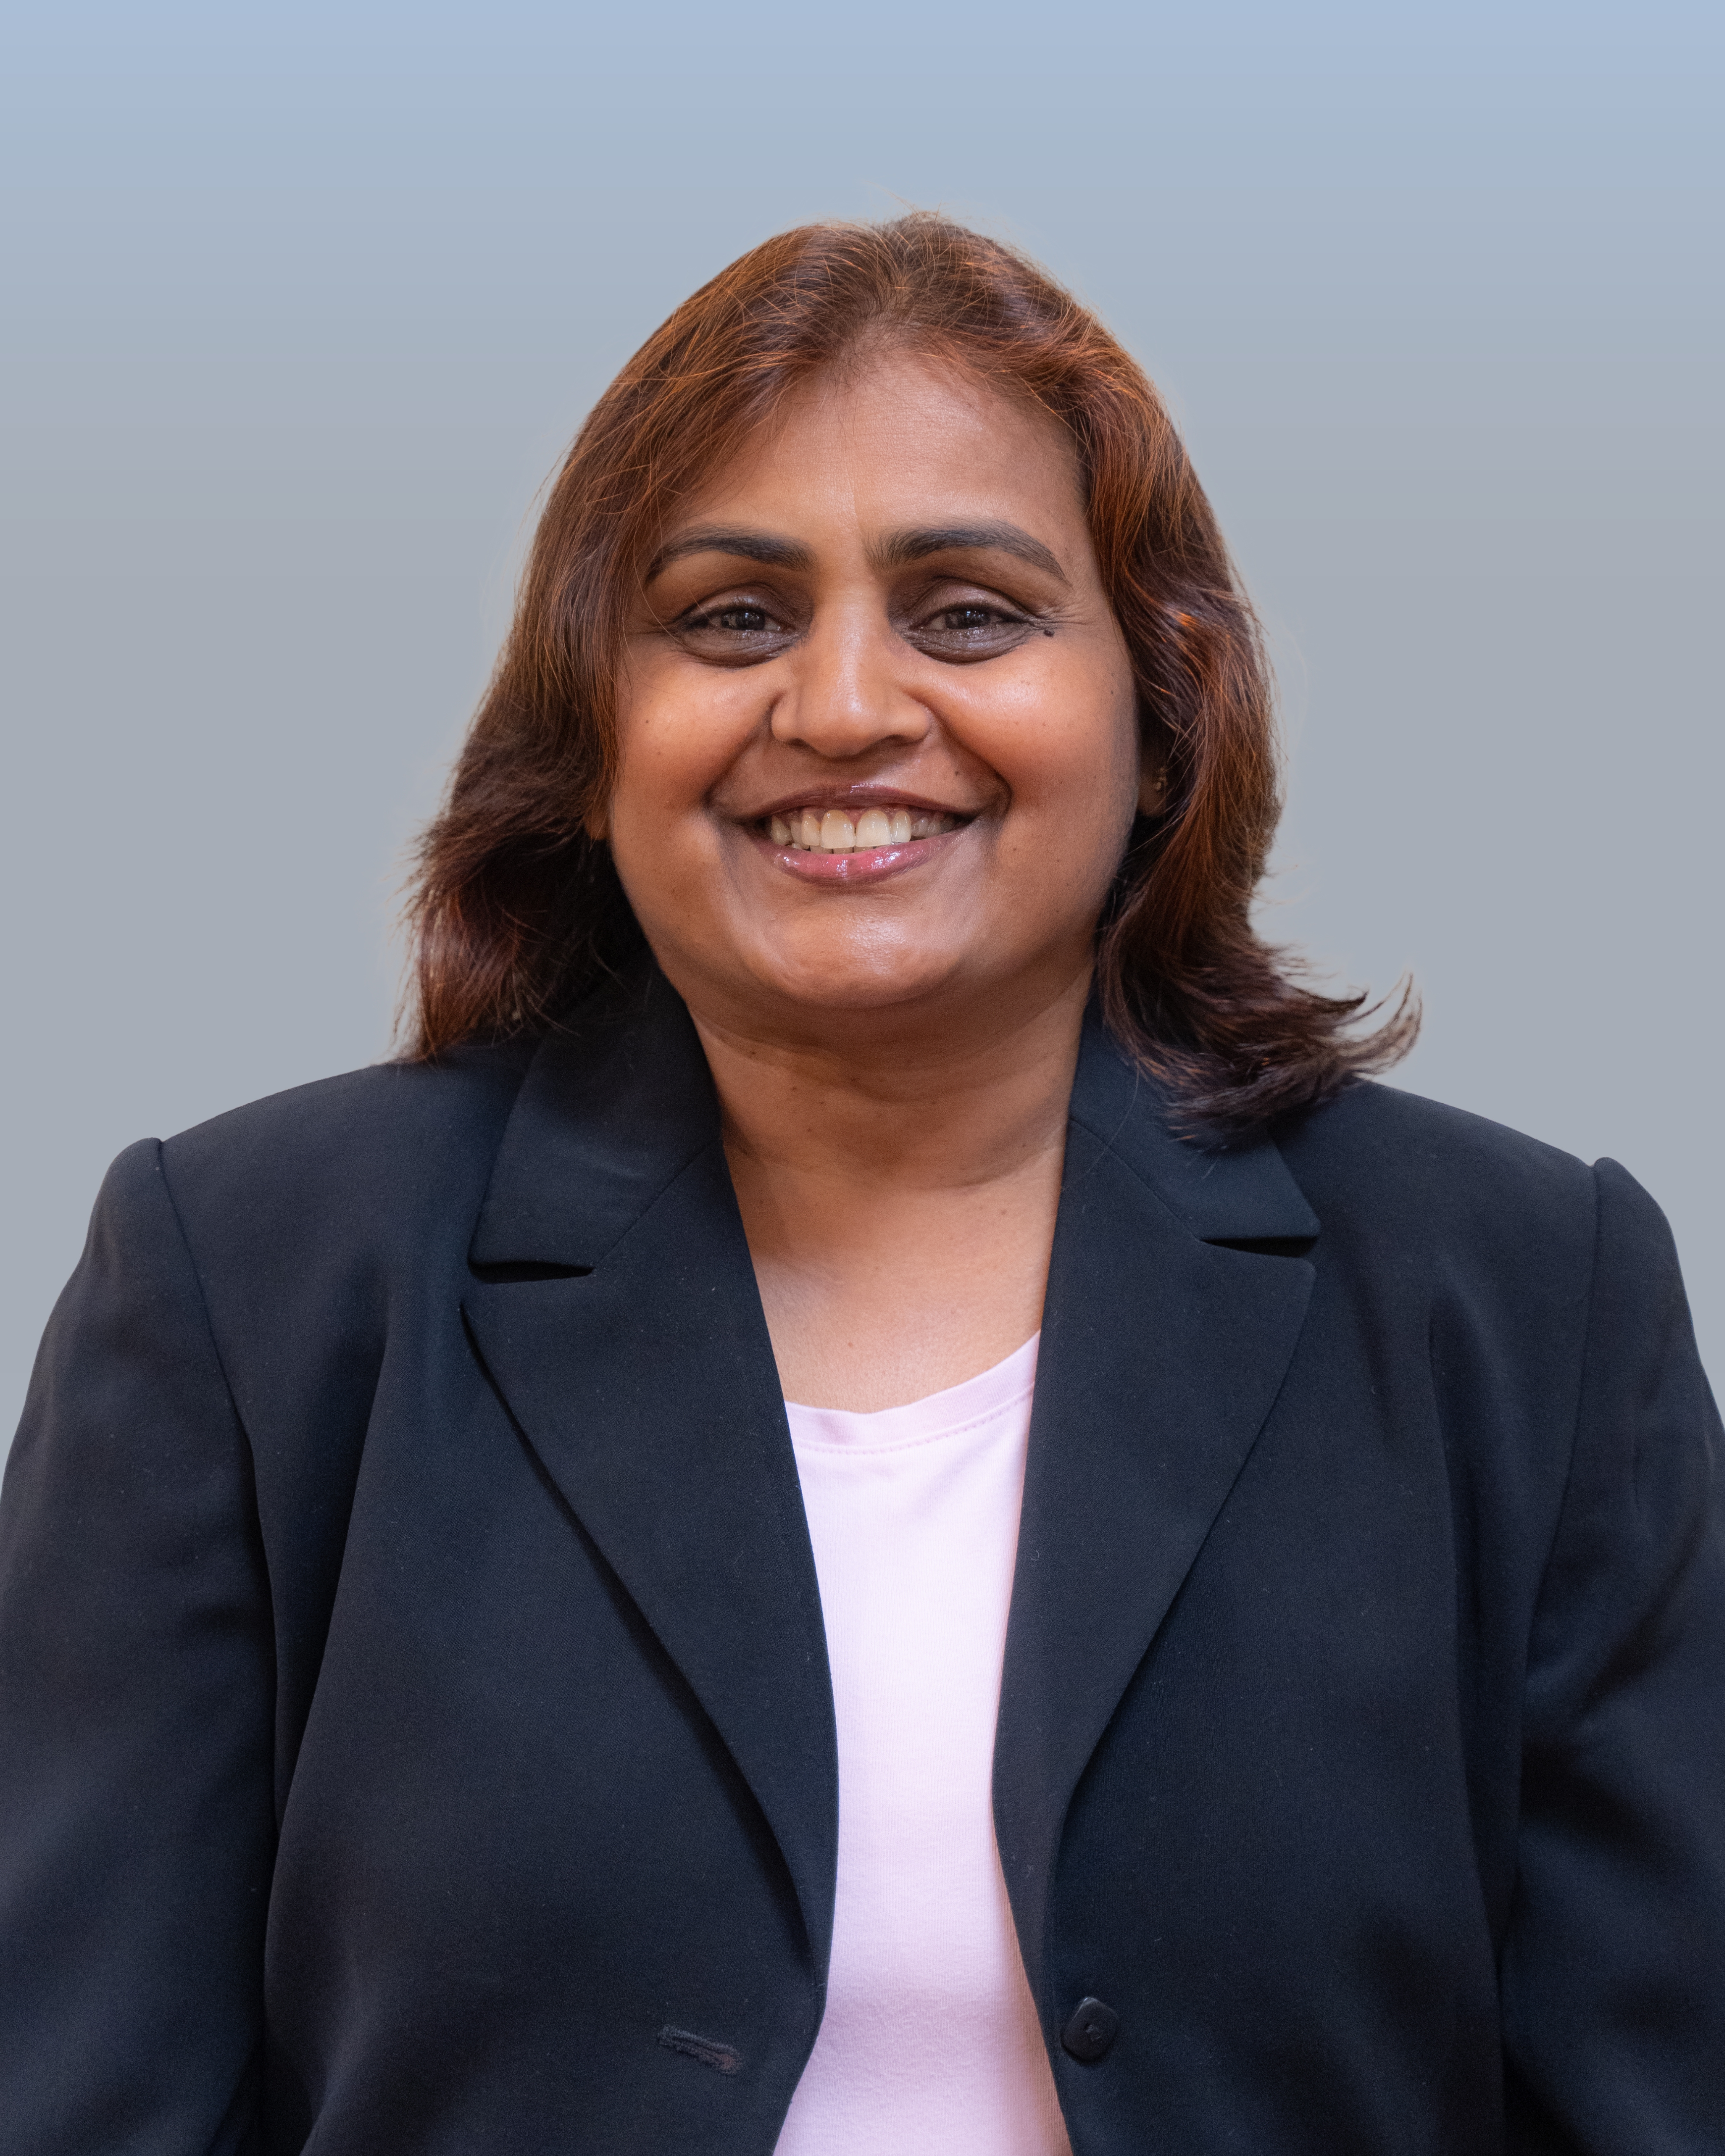 A photo of Seaview Orthopaedics' Interventional Pain Management Specialist Dr. Shruti Shah.